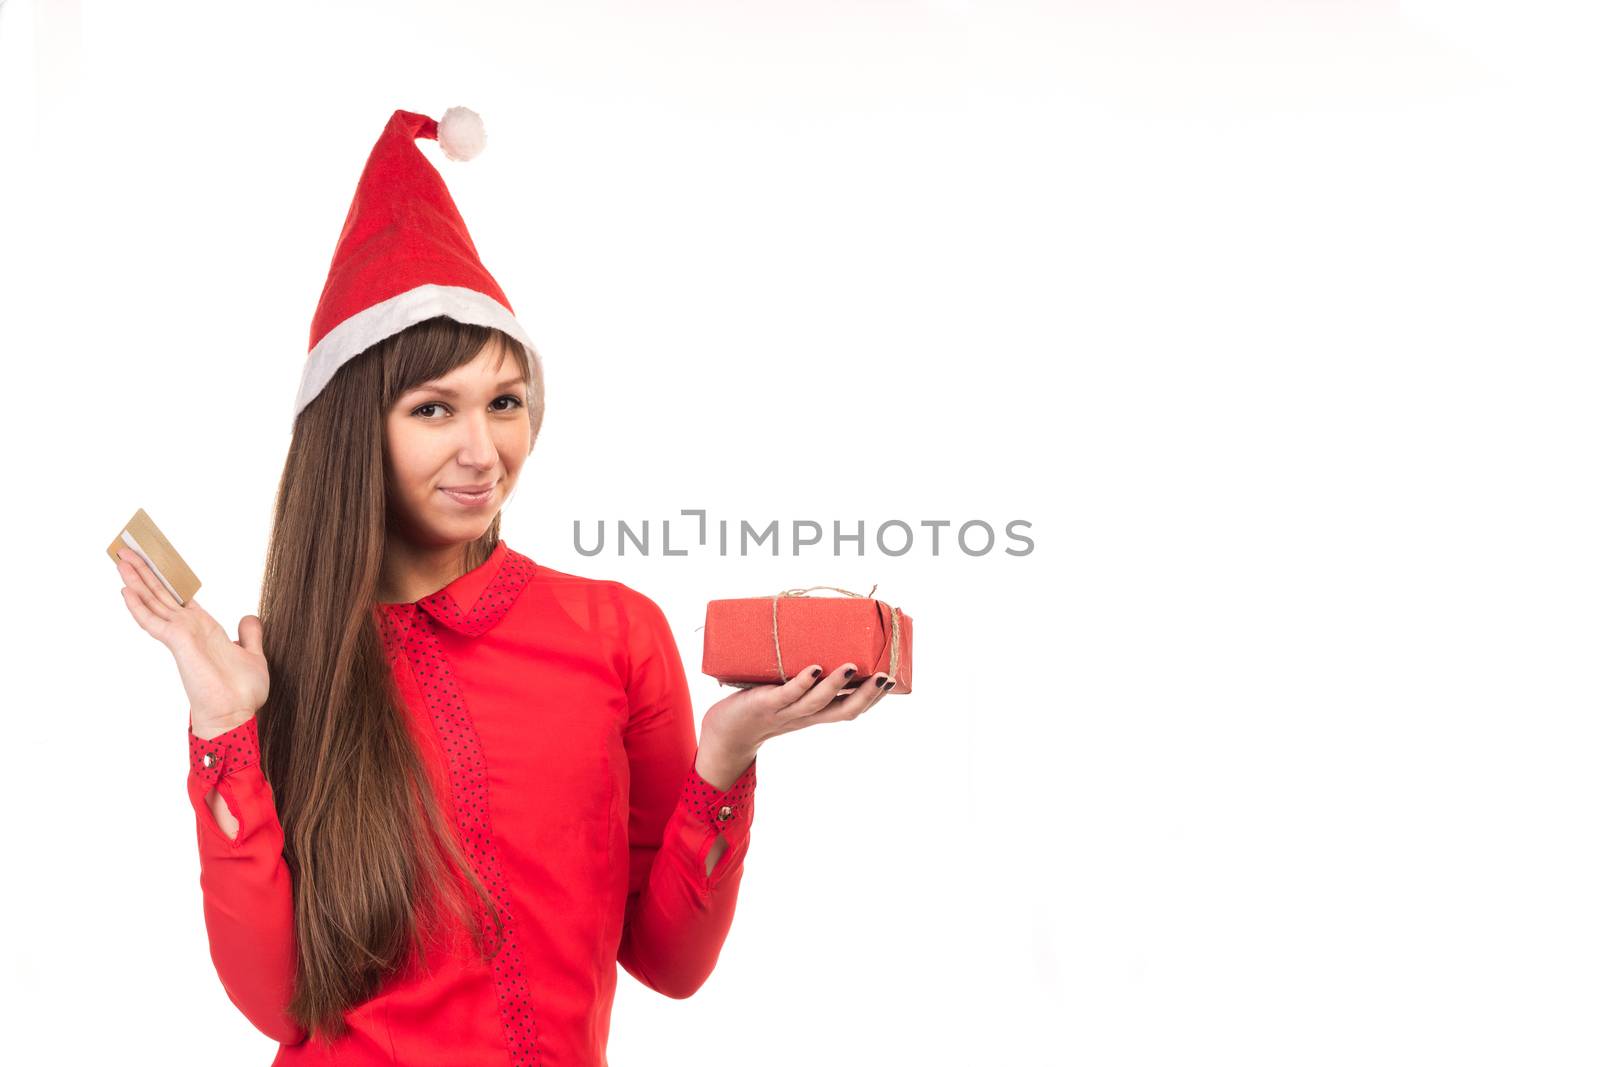 Young long-haired woman in red christmas cap with gold credit card and red gift box